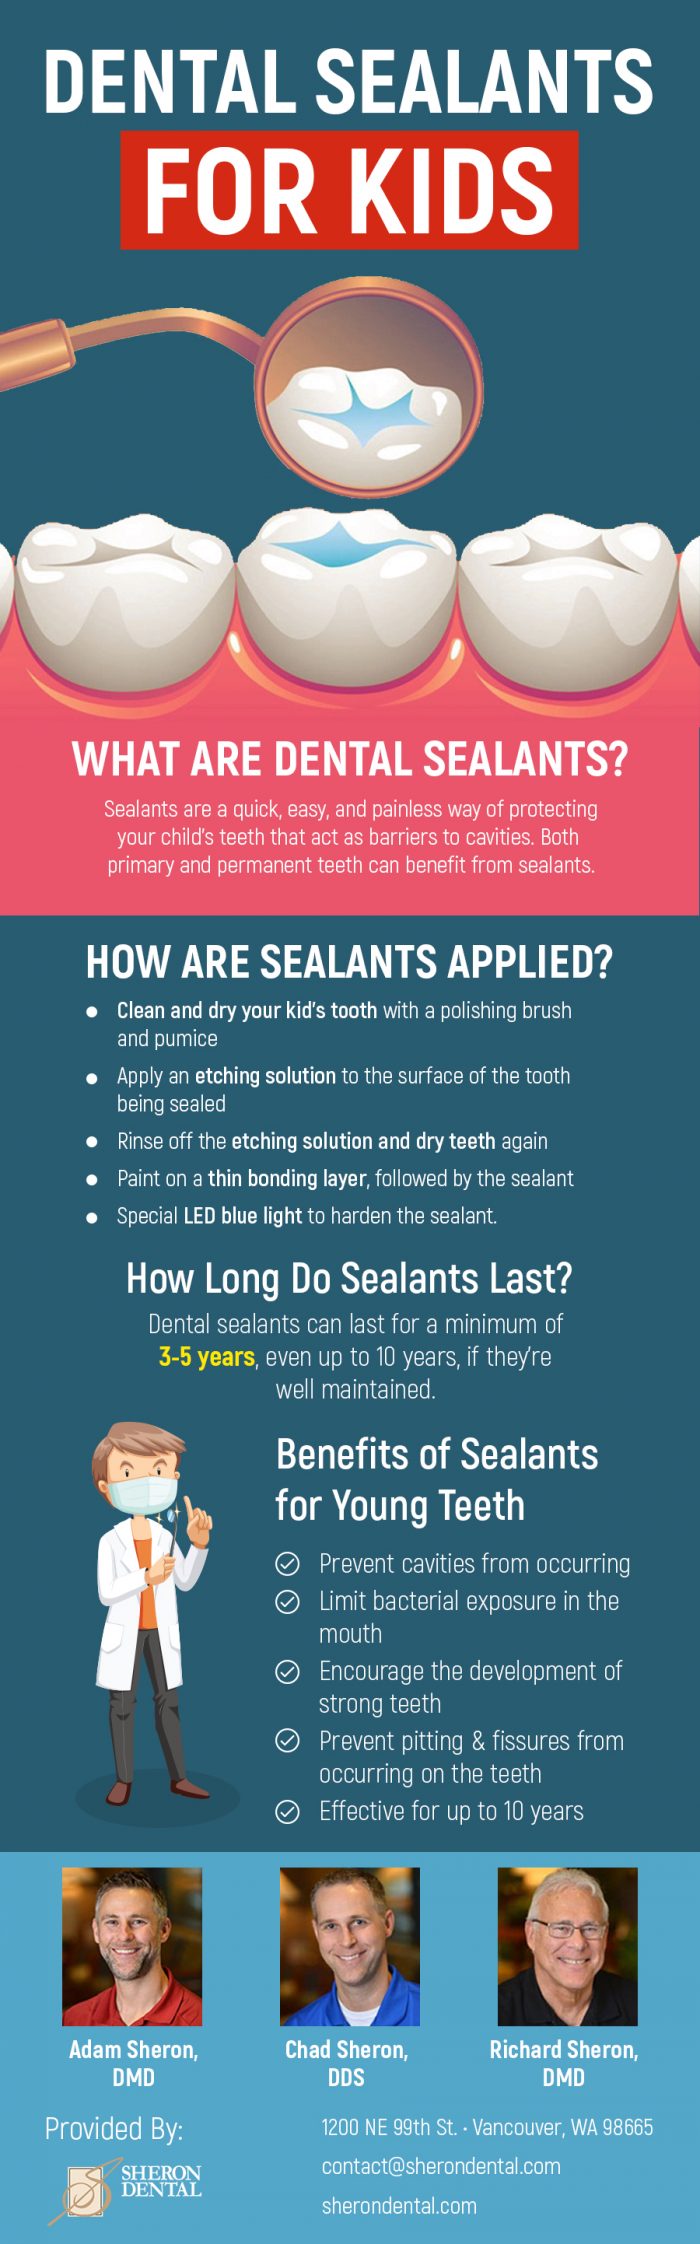 Get Quality Dental Sealants in Vancouver, WA from Sheron Dental